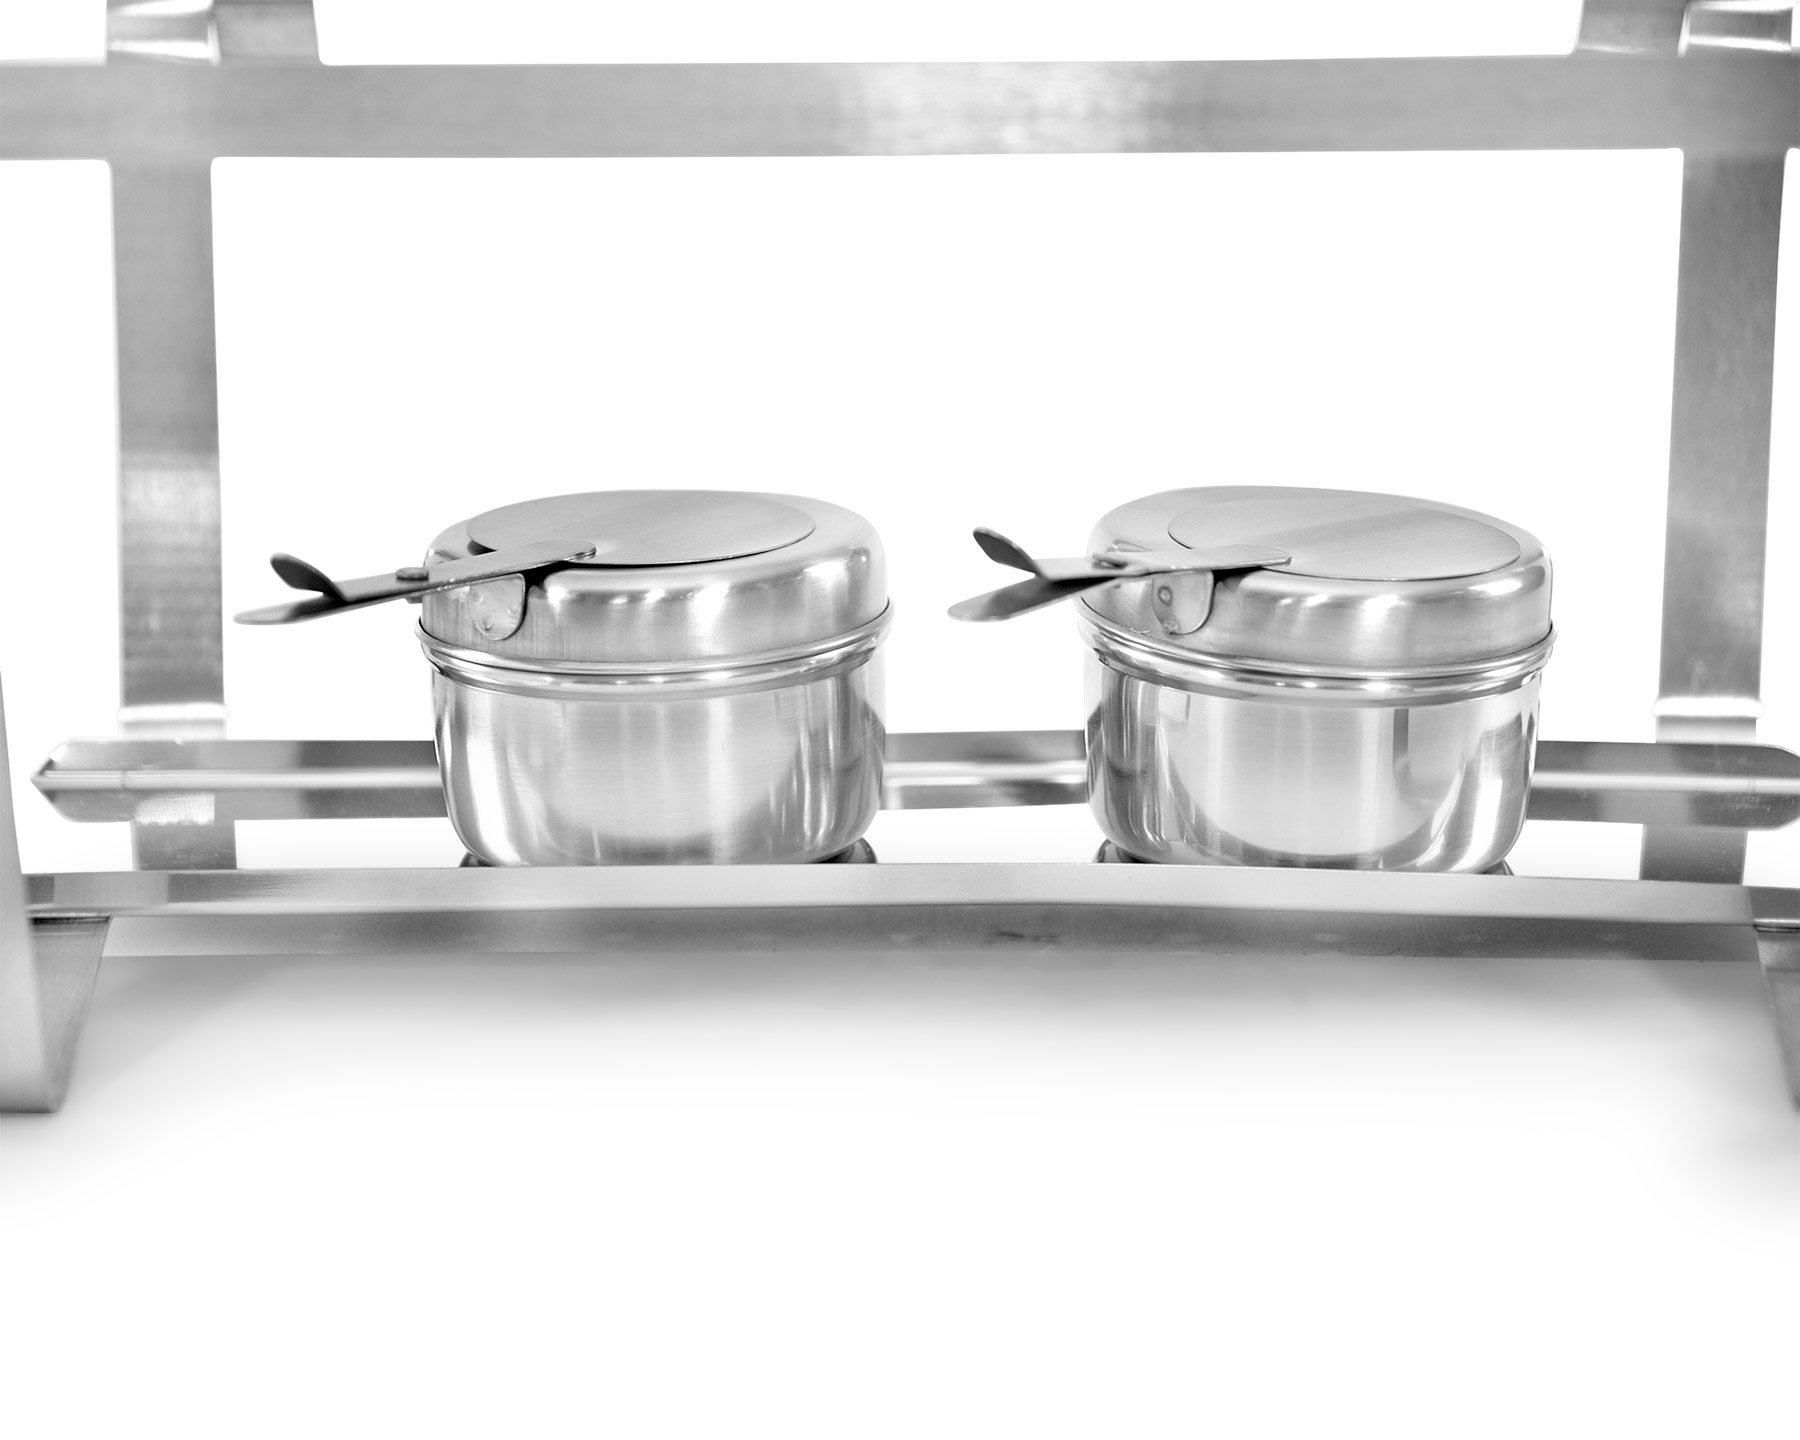 Chafing dish - 1/1 GN - 9L